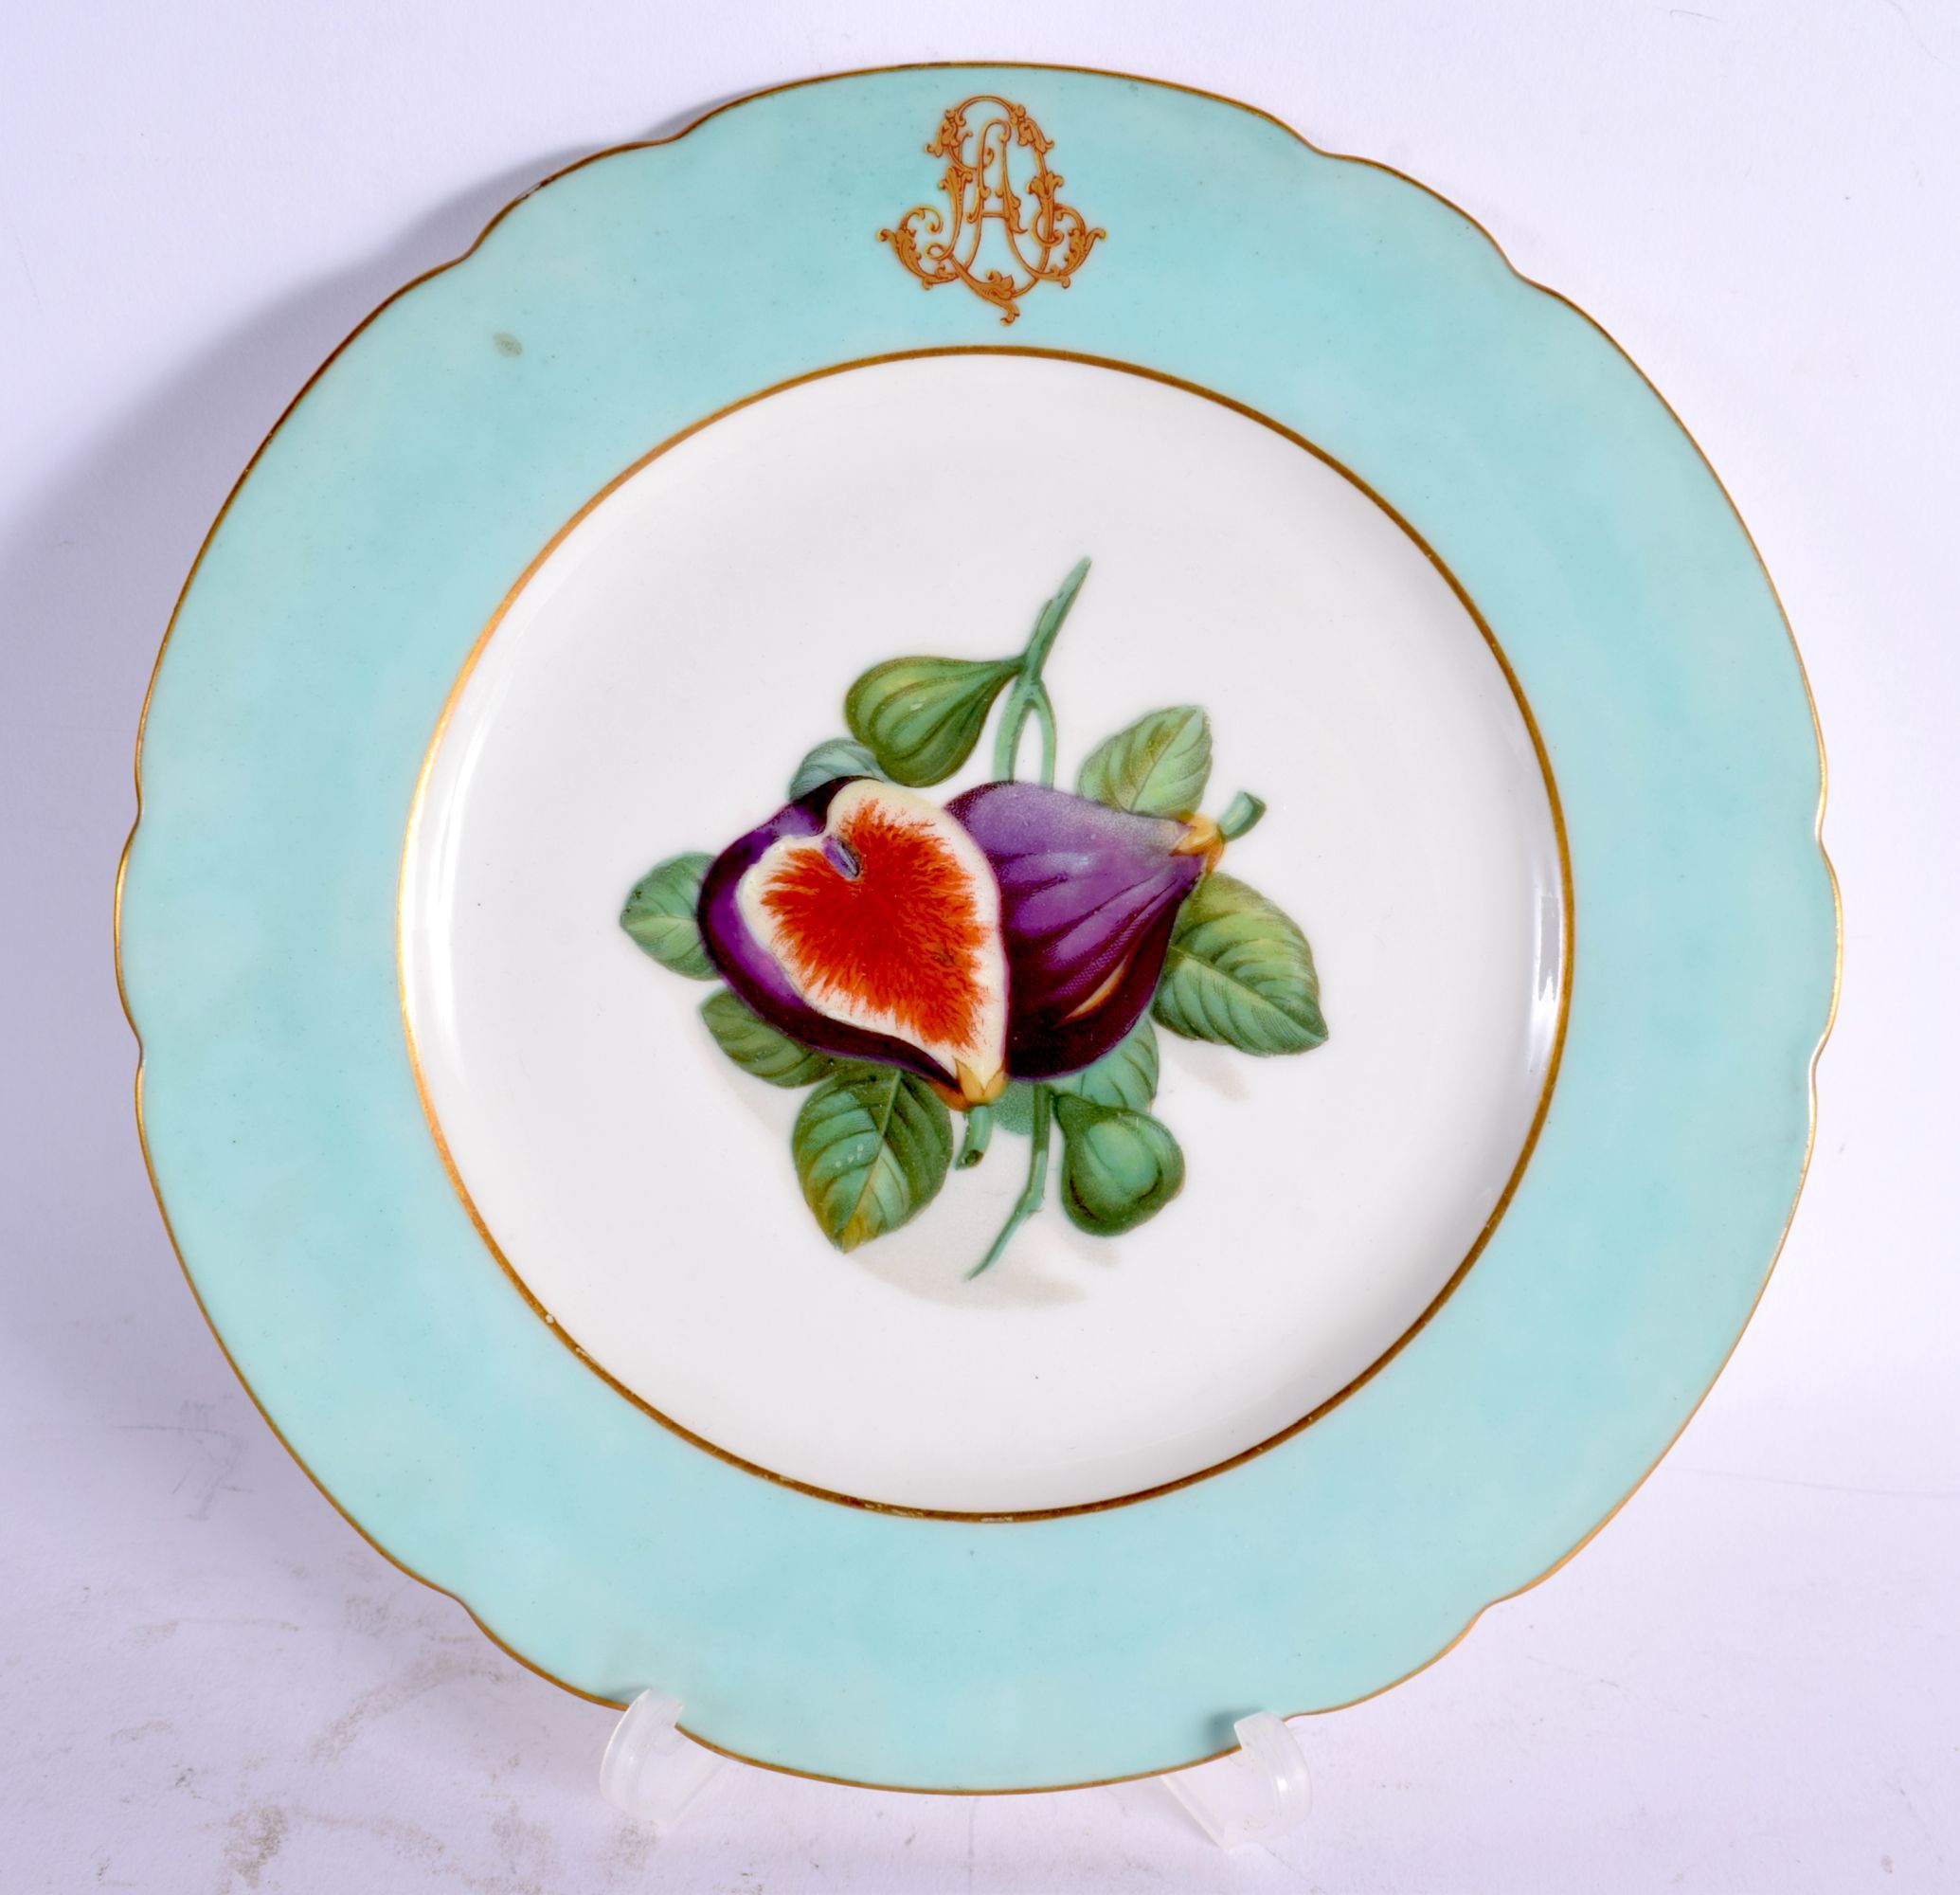 A LARGE AND EXTENSIVE LATE 19TH CENTURY FRENCH PORCELAIN DINNER SERVICE painted with a monogram. Lar - Image 10 of 14